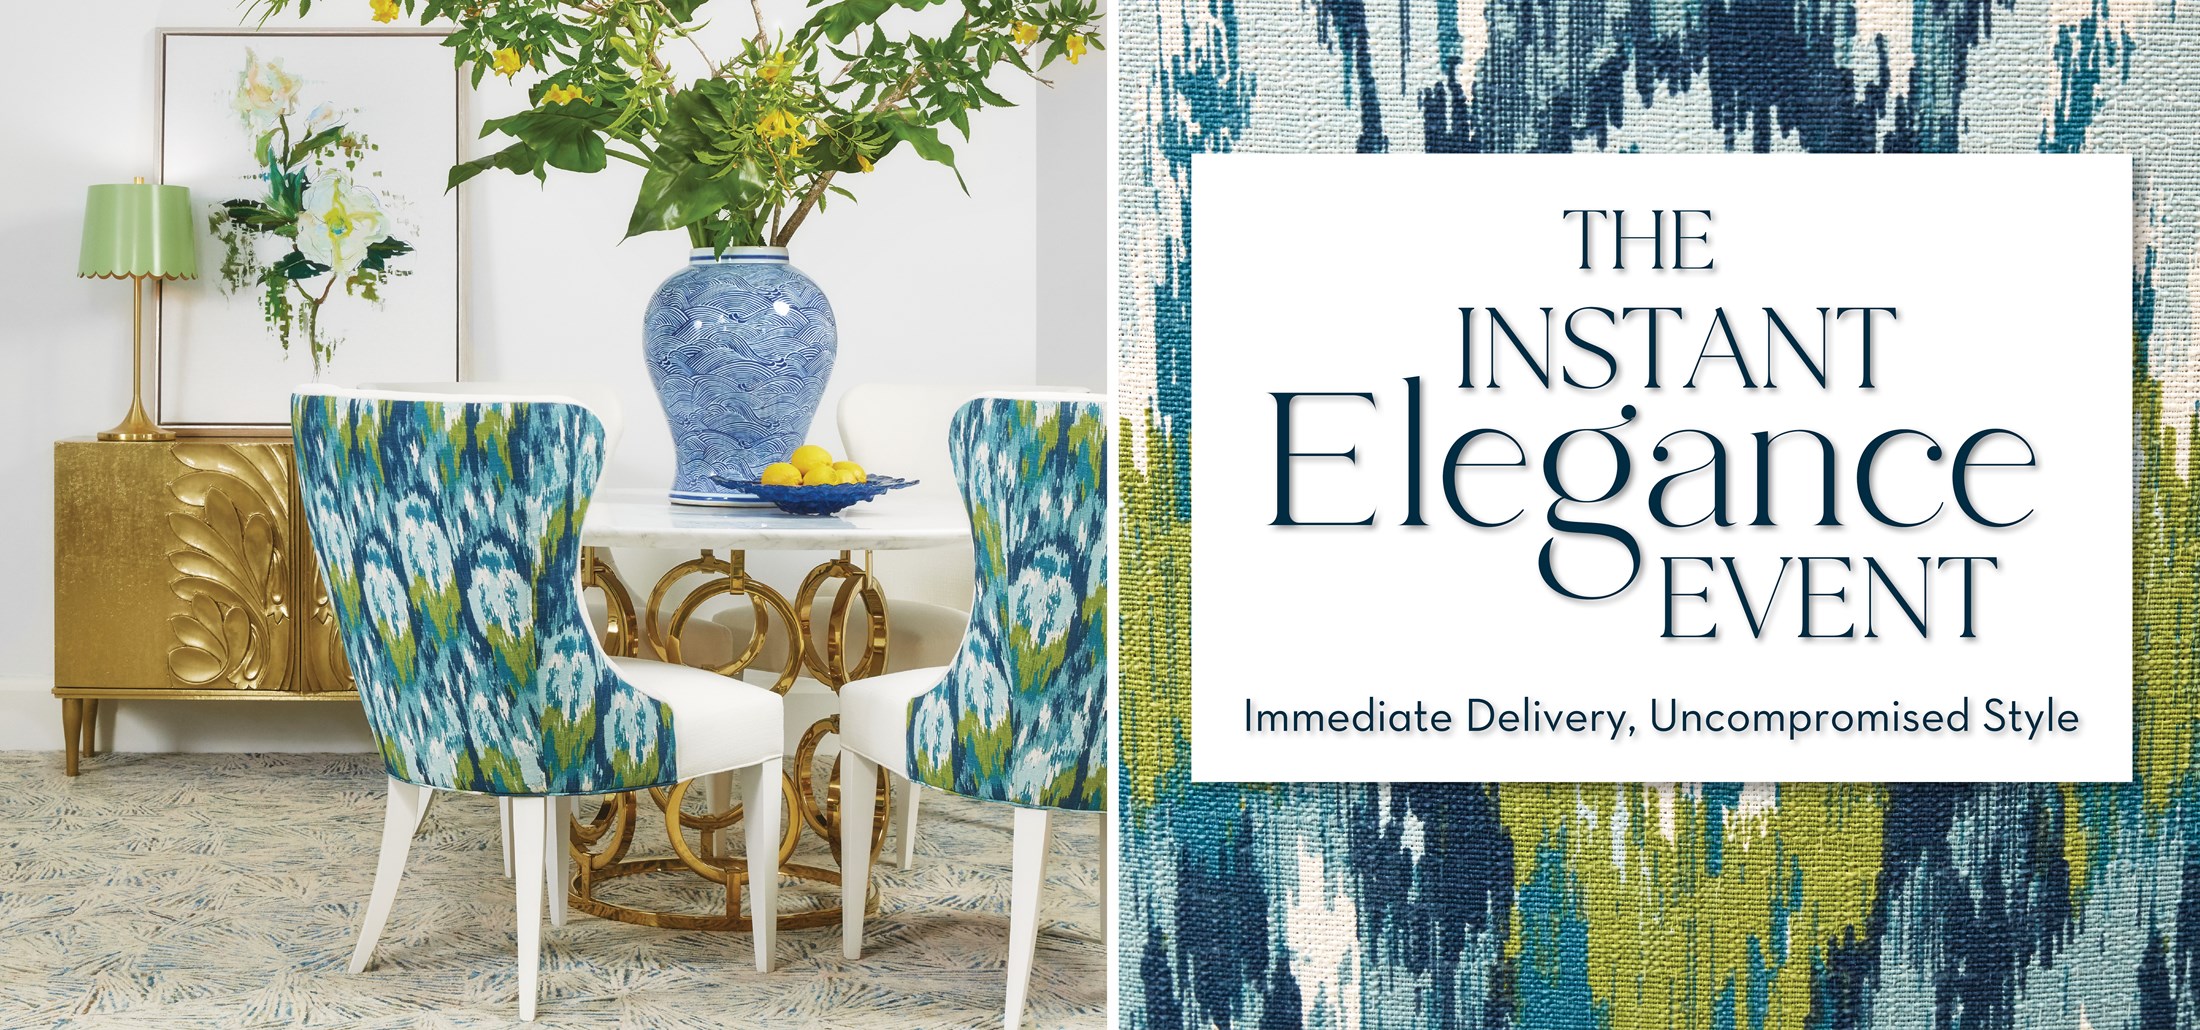 Image of a gold table with a vase of greenery, blue and green chairs. Text: The Instant Elegance Event. Immediate Delivery, Uncompromised Style. Click to view. Links to The Instant Elegance Event.